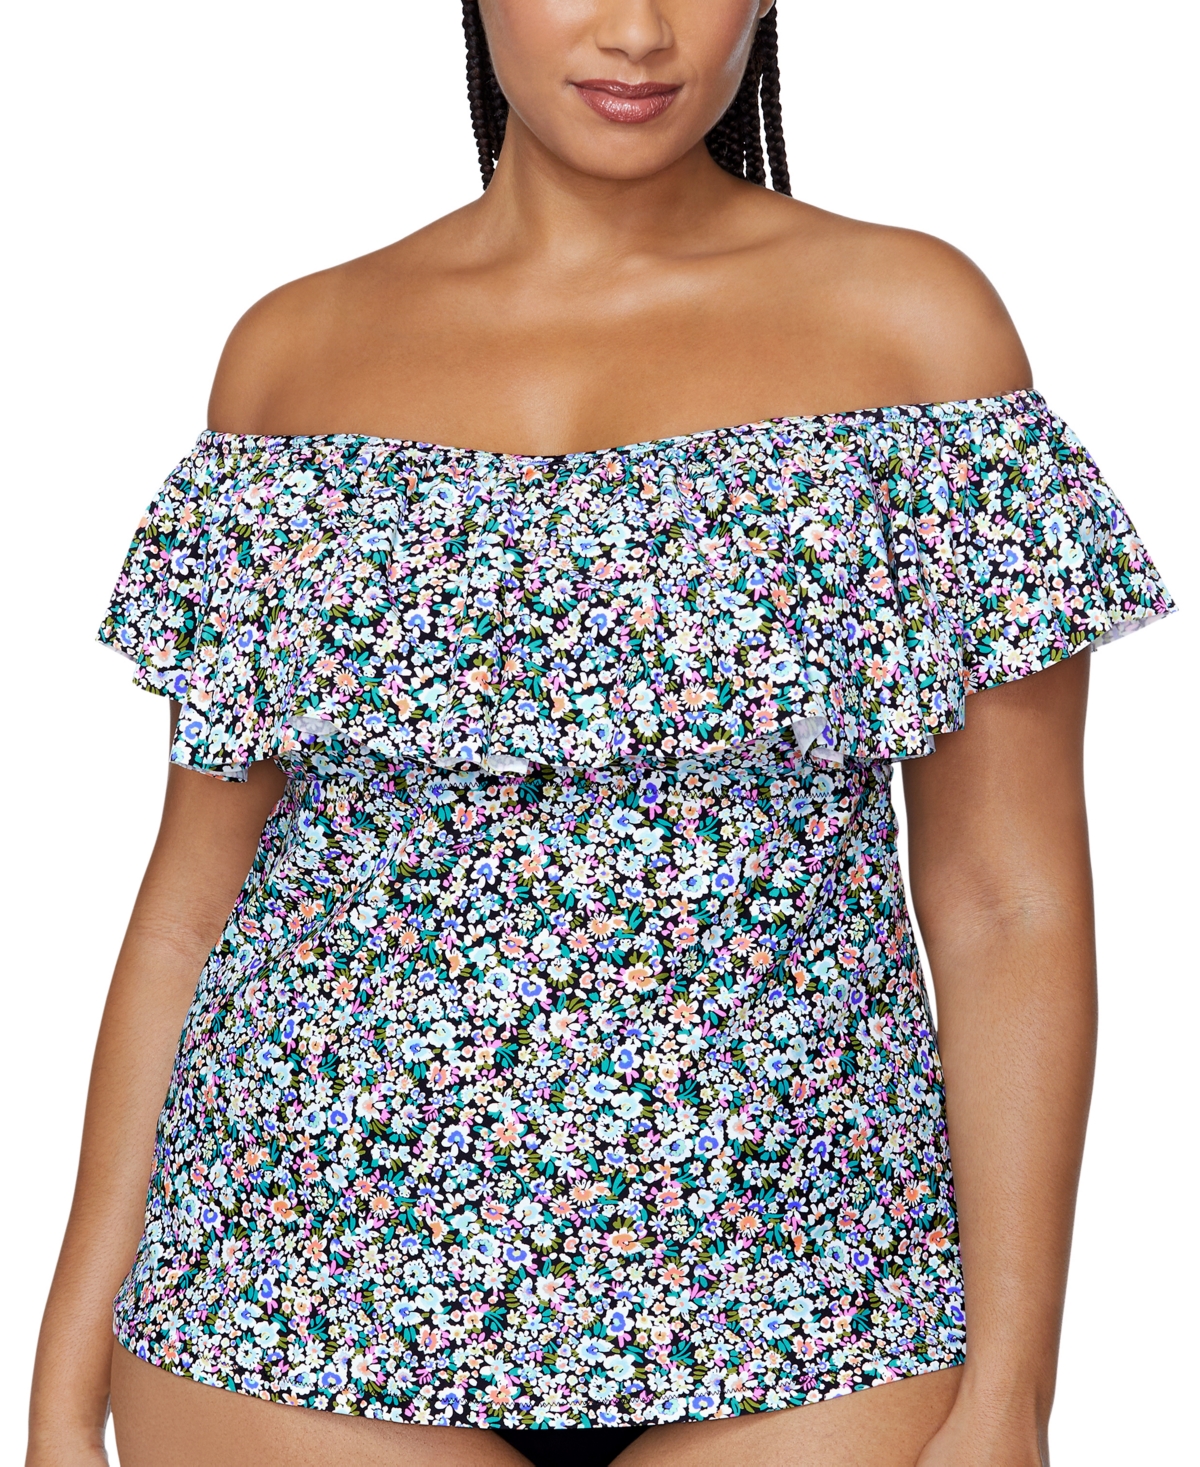 Trendy Plus Size Tortuga Ruffled Off-The-Shoulder Tankini Top - Black Floral